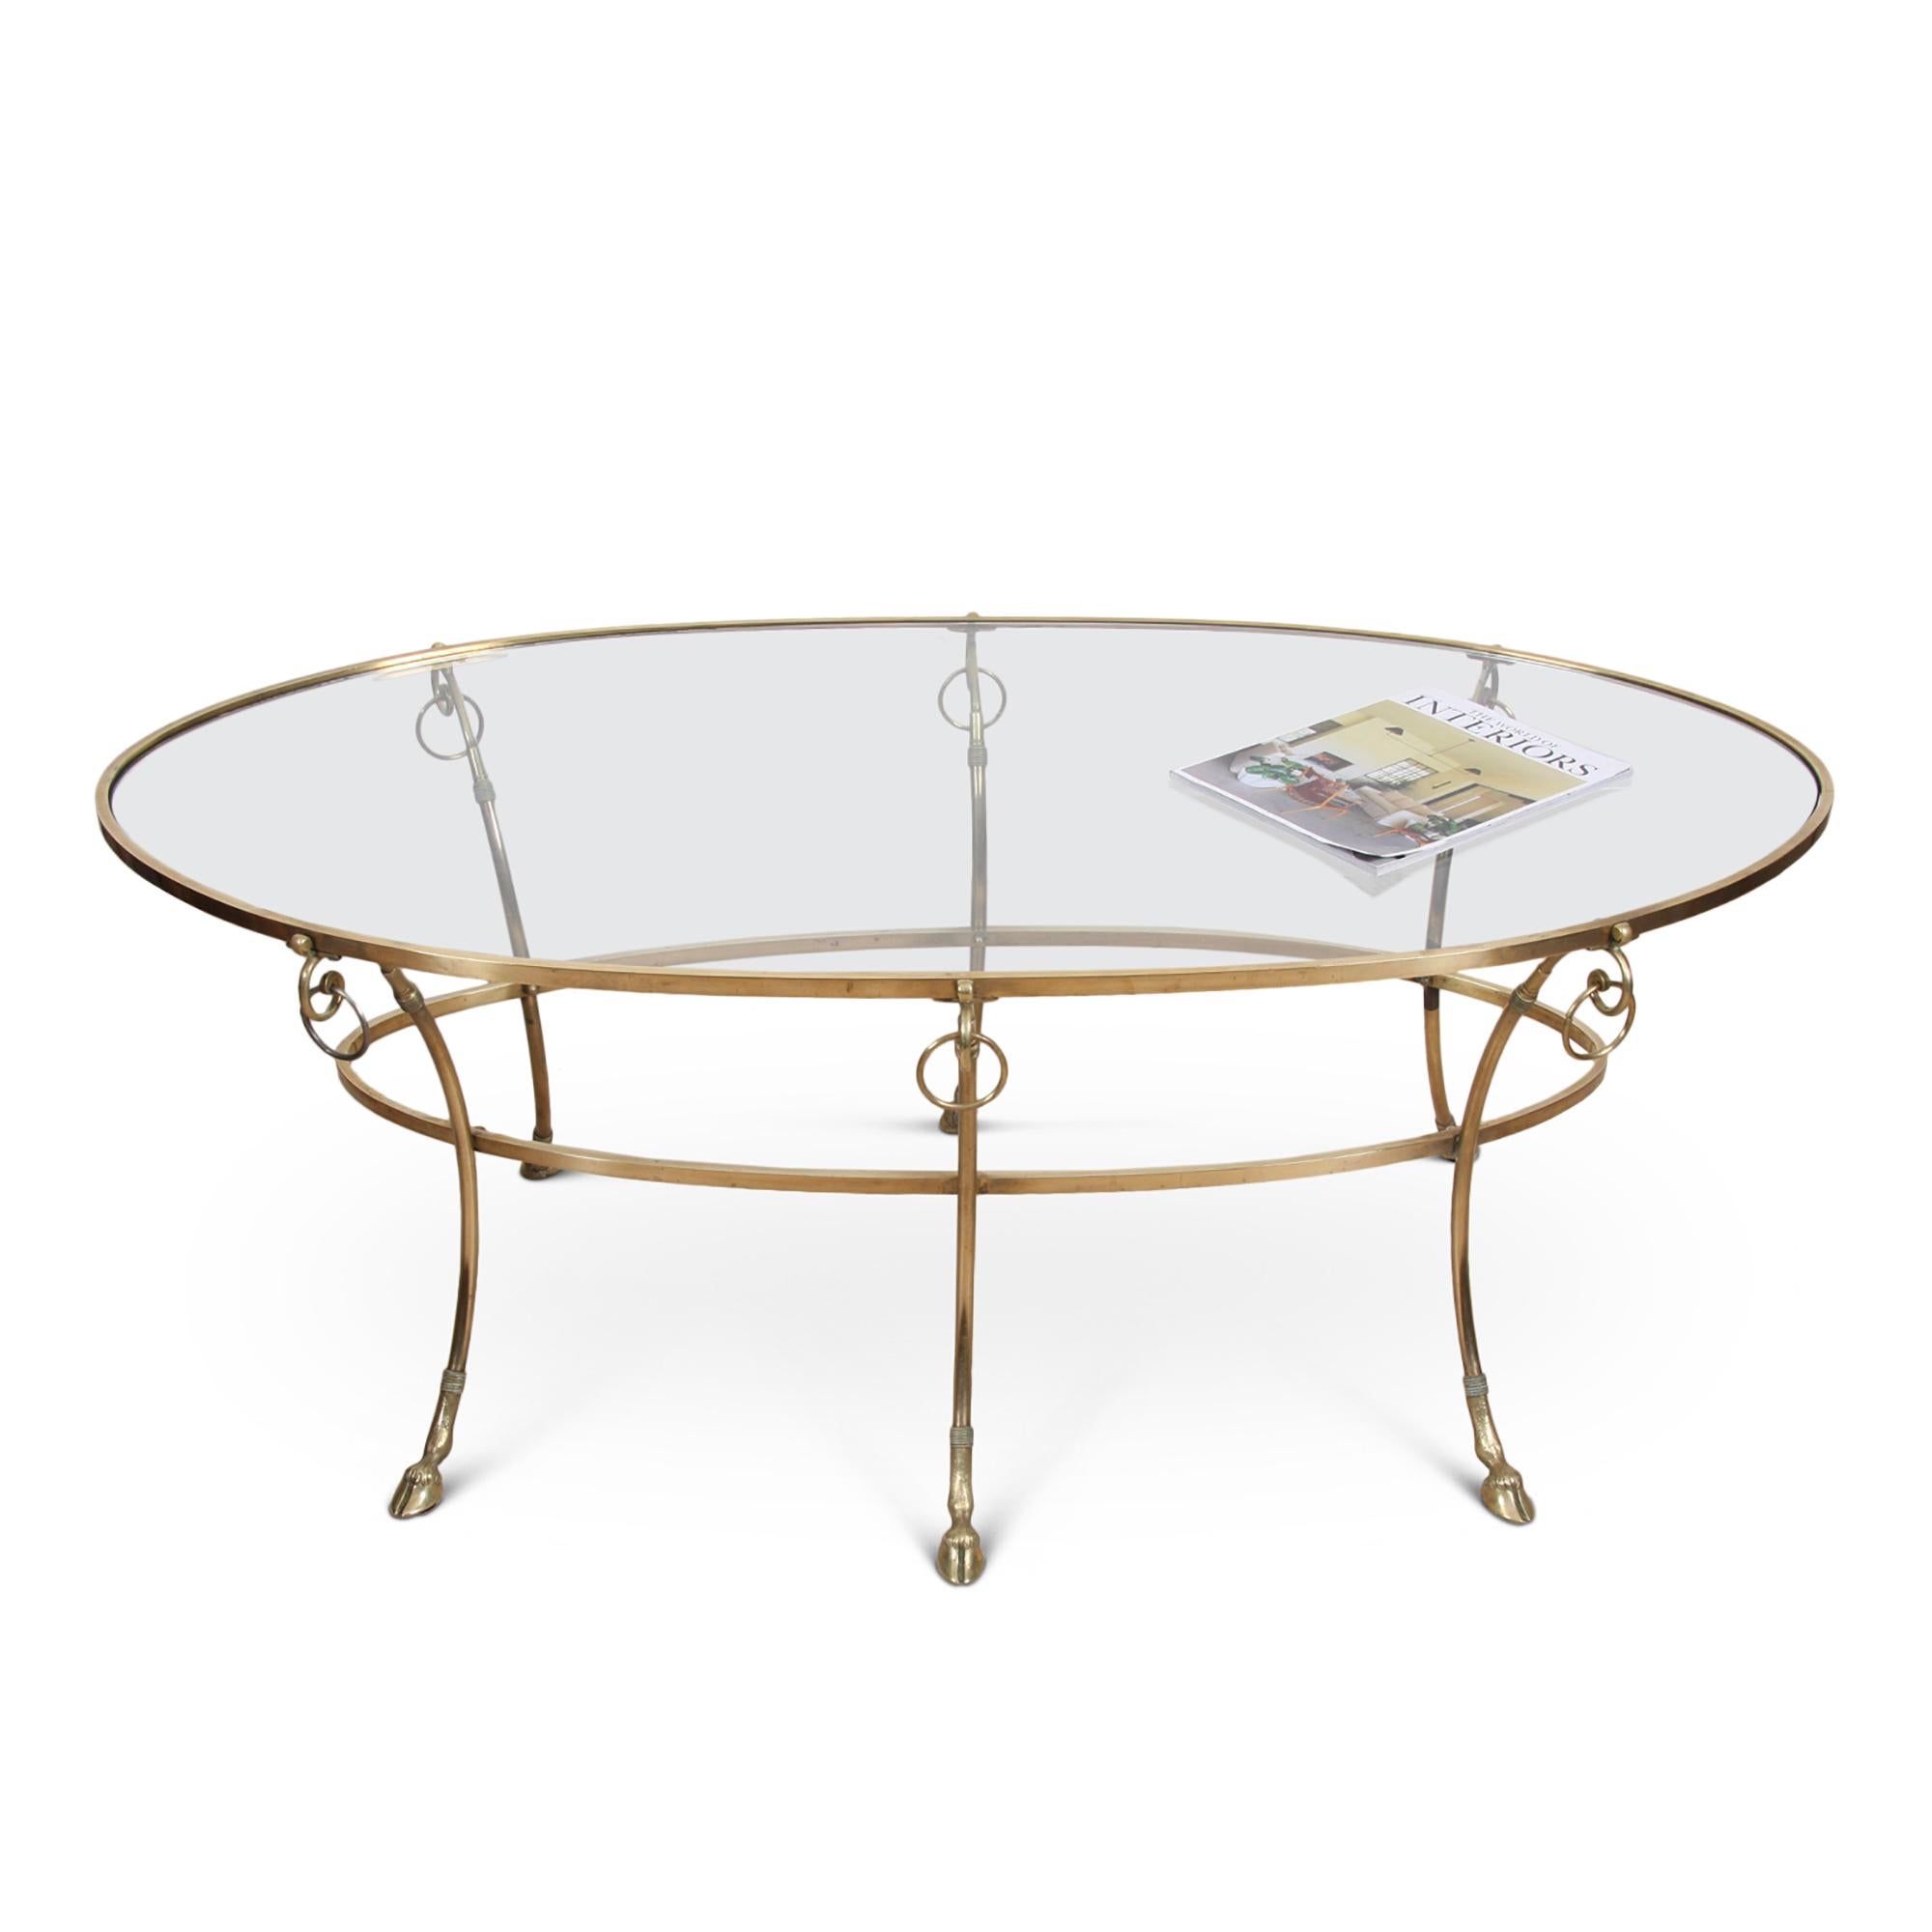 A charming Maison Baguès-style coffee table with hoof feet. This chic oval-shaped table originates from 1960s, France.